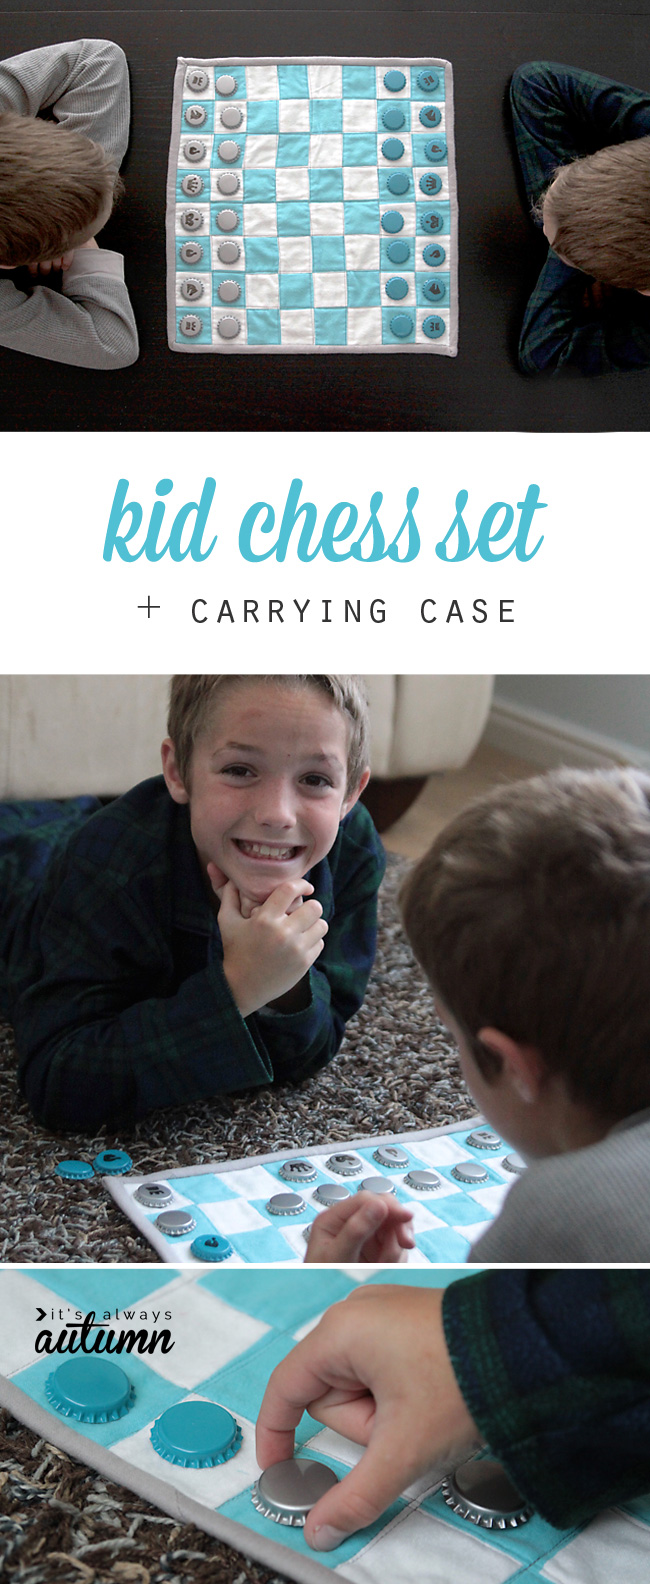 How fun! Make a fabric chess set and carrying case for your kids - great gift idea!